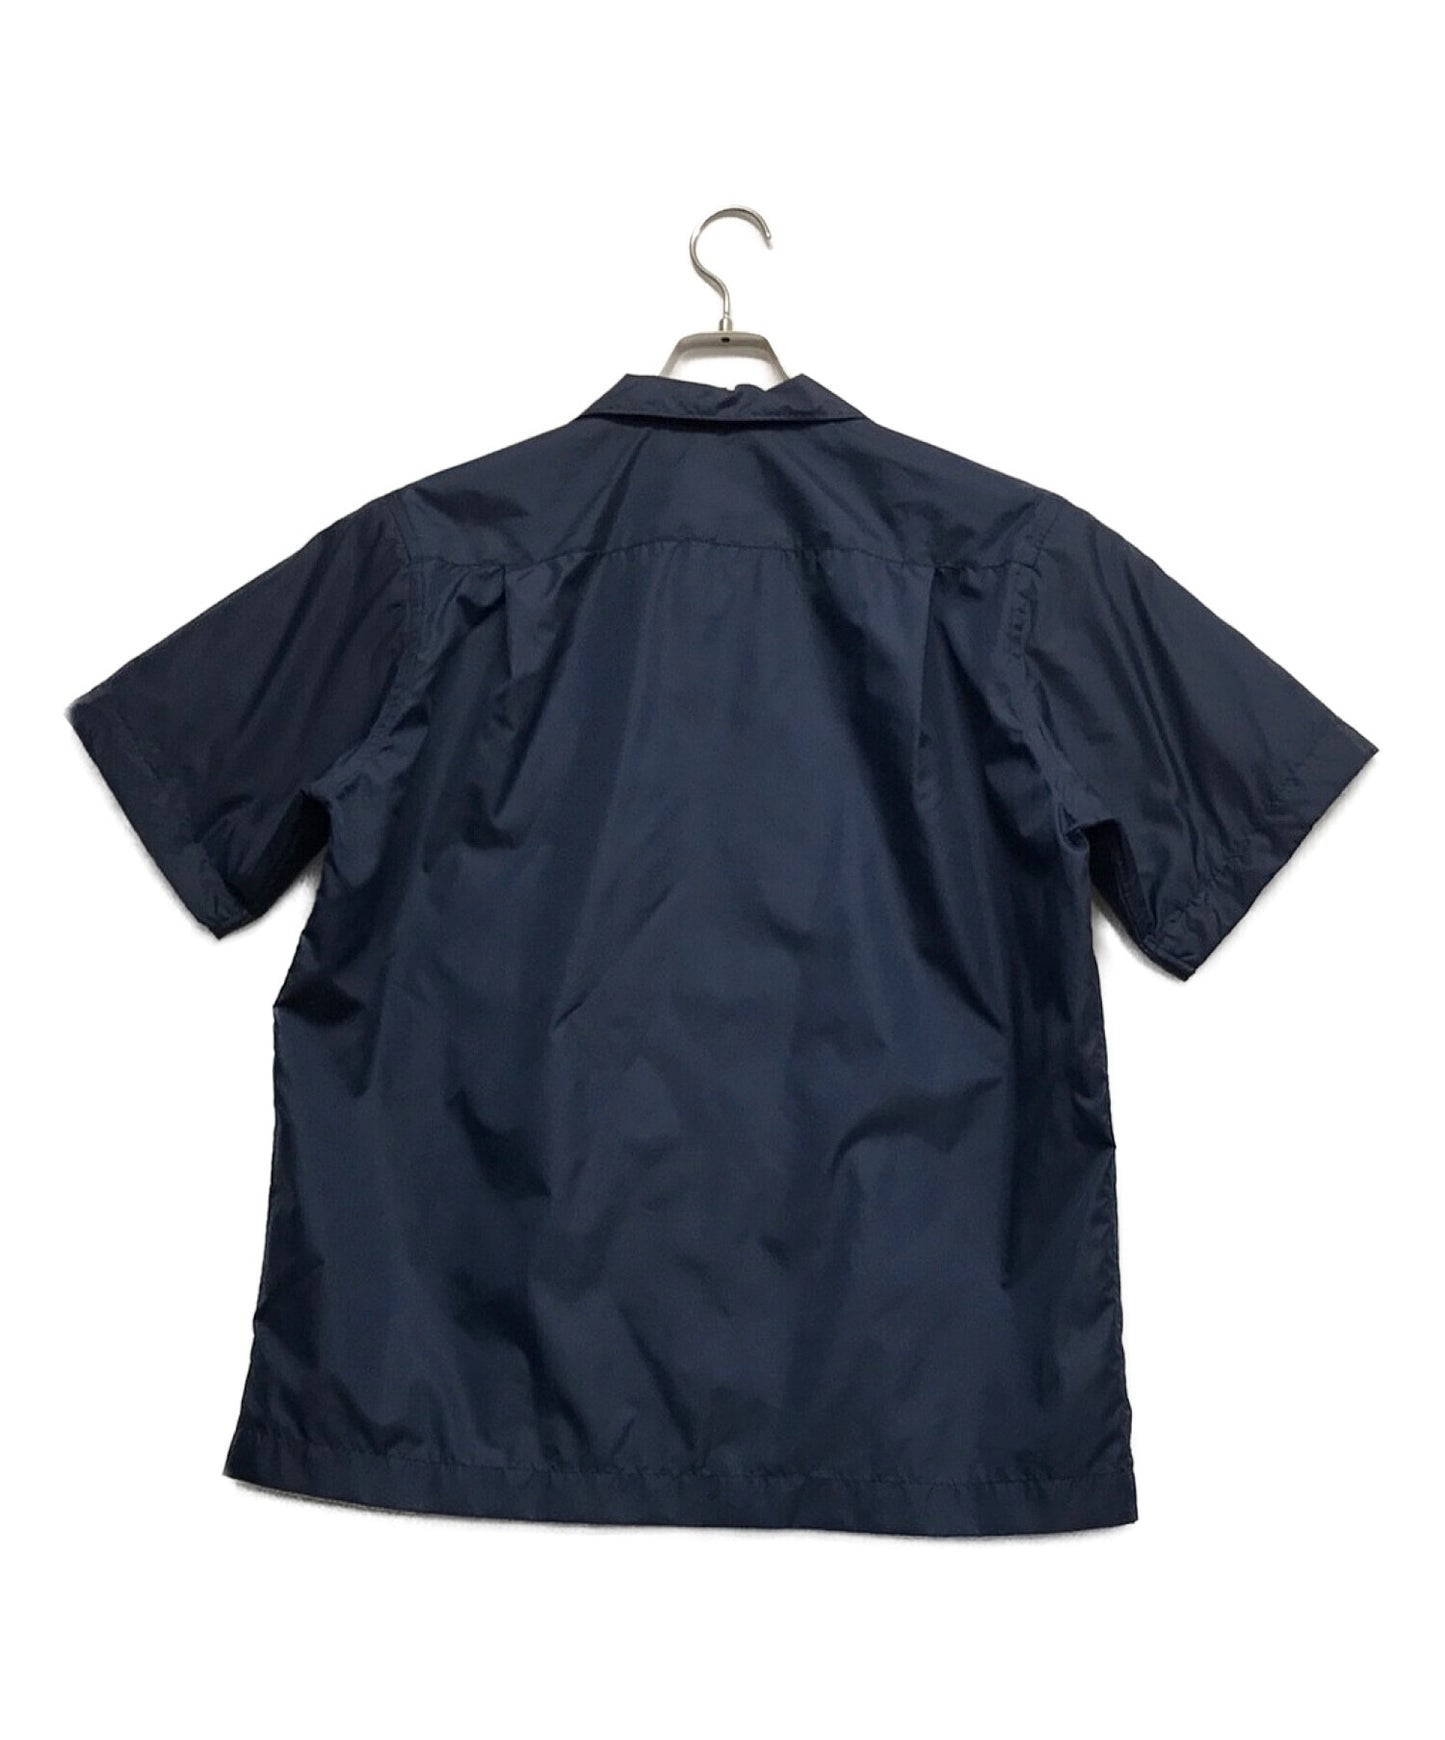 COMME des GARCONS HOMME PLUS 90's Sleeve Lined Ruffle Nylon Open Collar Shirt Short Sleeved Shirt Shirt PB-100230 AD1998